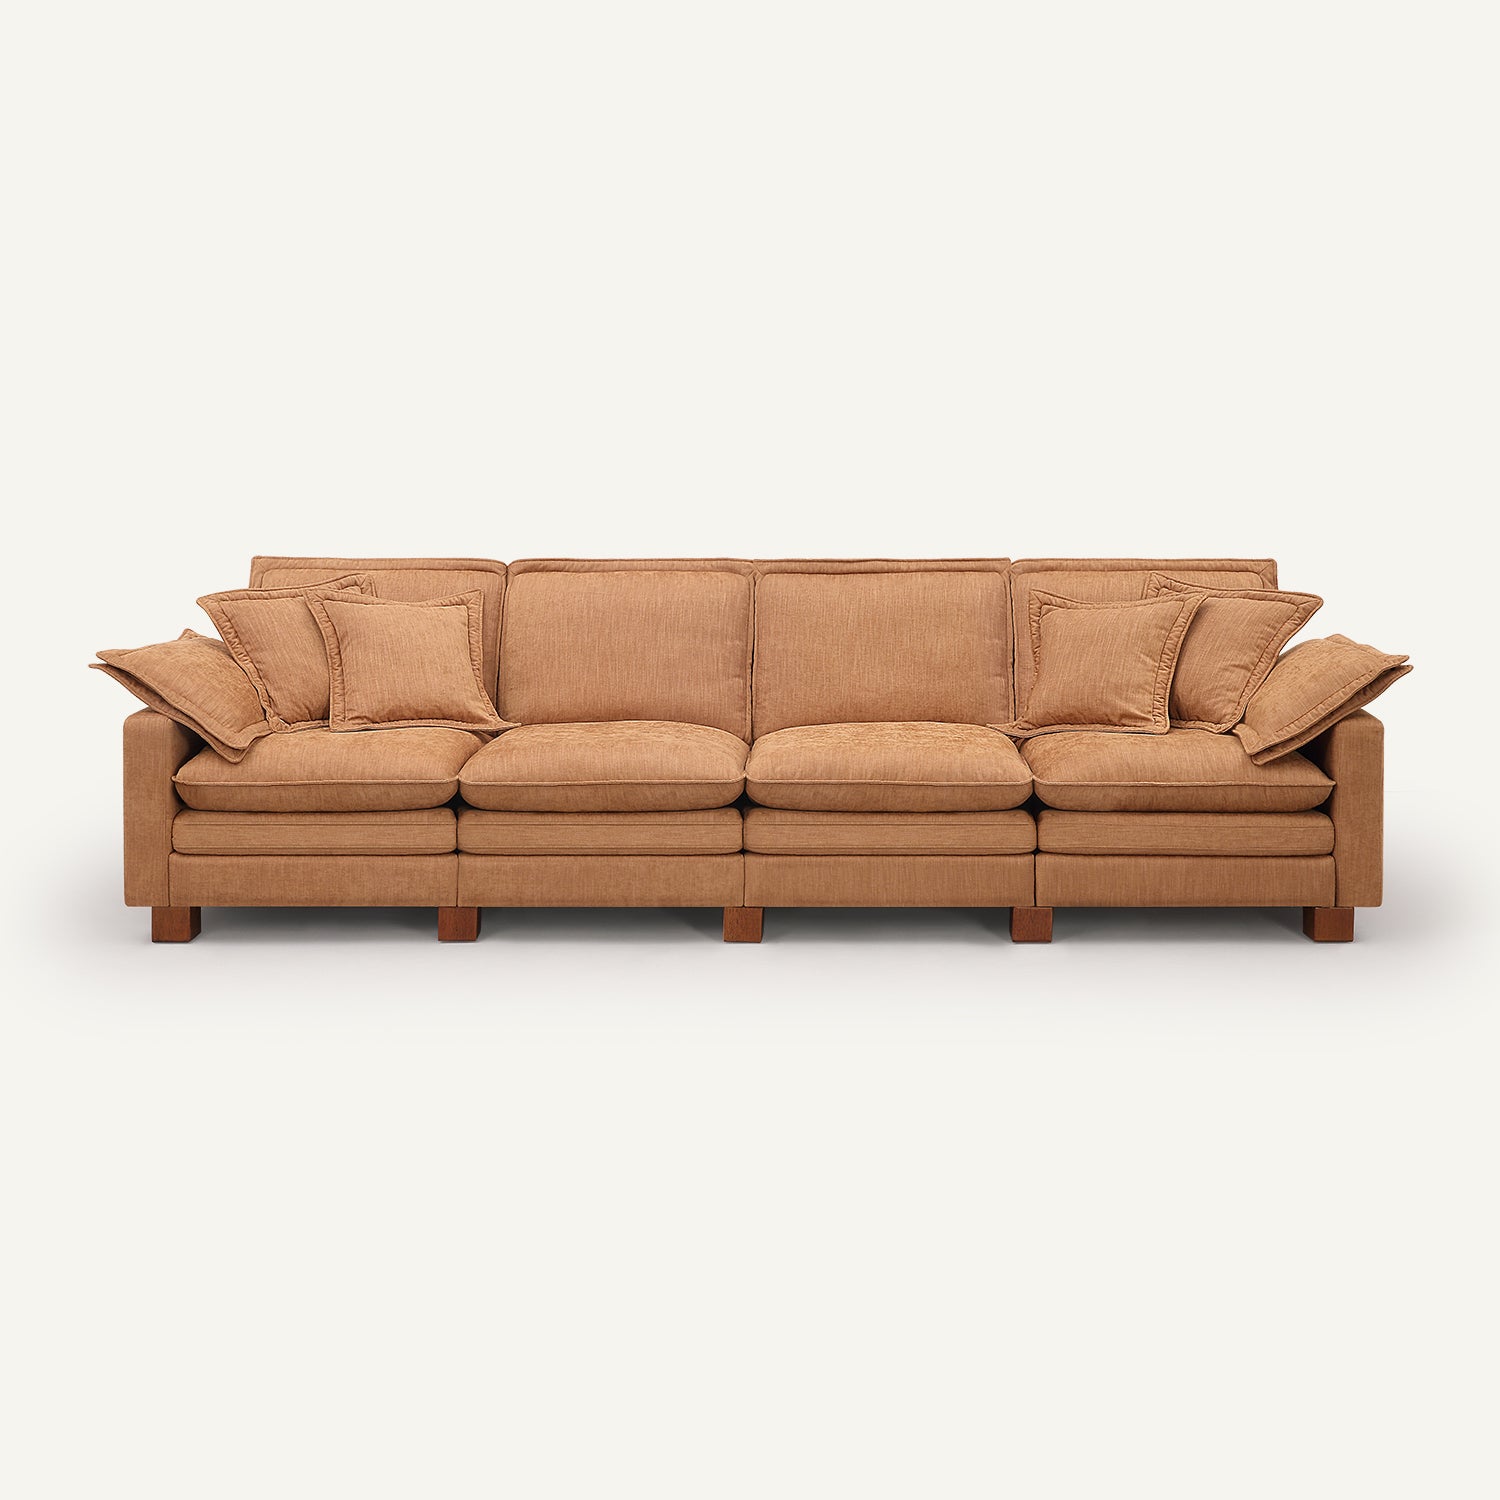 Stacked Tan Linen 4-Seat Sofa with Double Ottomans